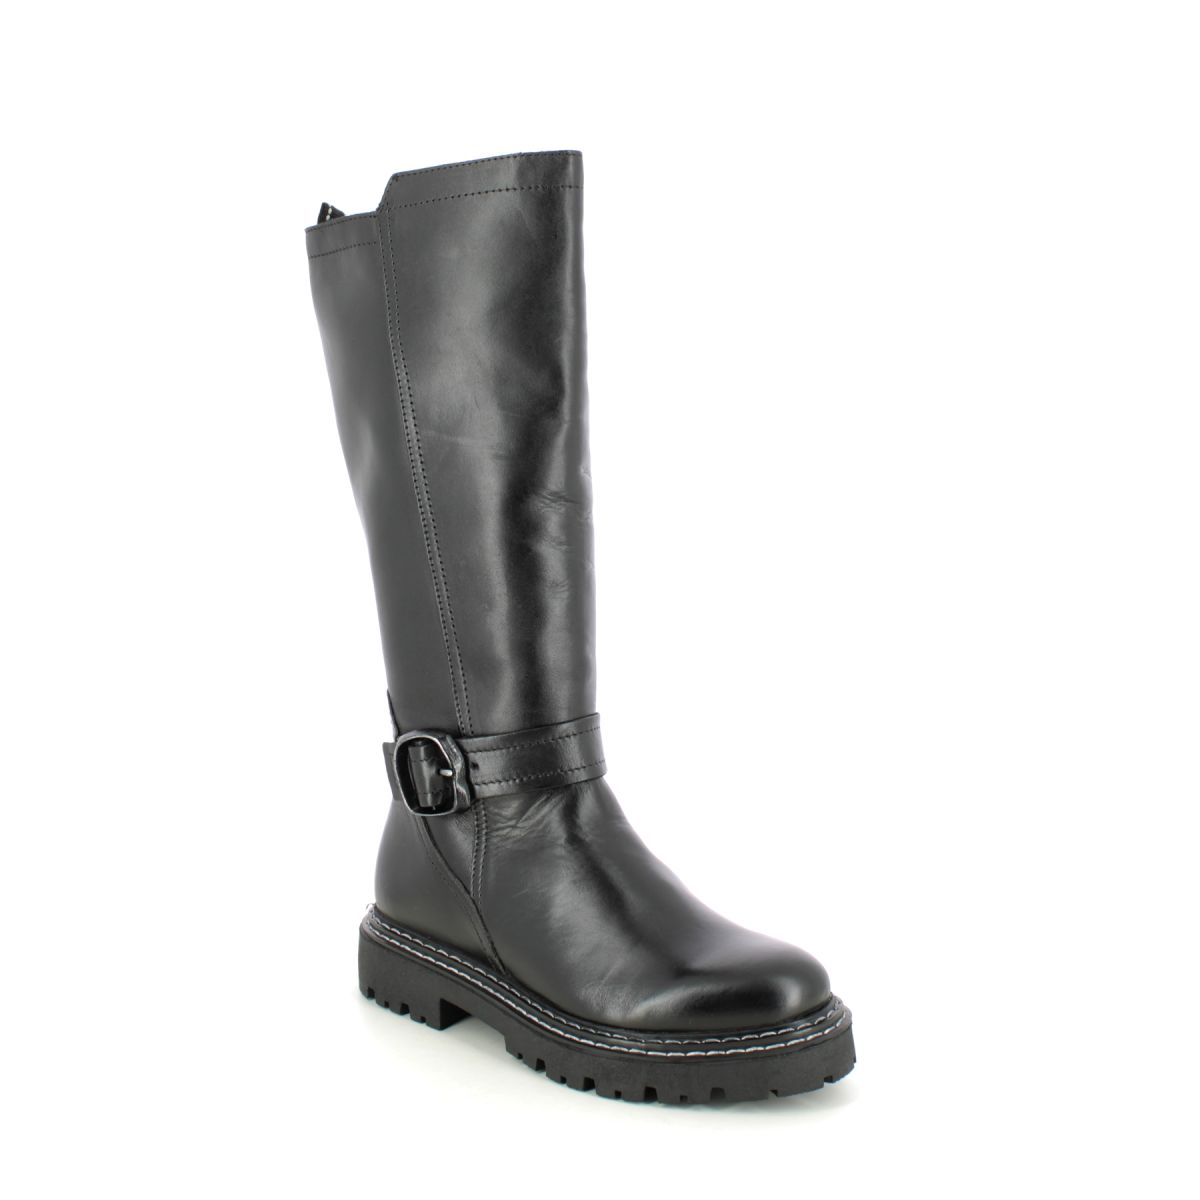 Marco Tozzi Sensio Long Black Leather Womens Knee-High Boots 25610-29-002 In Size 41 In Plain Black Leather